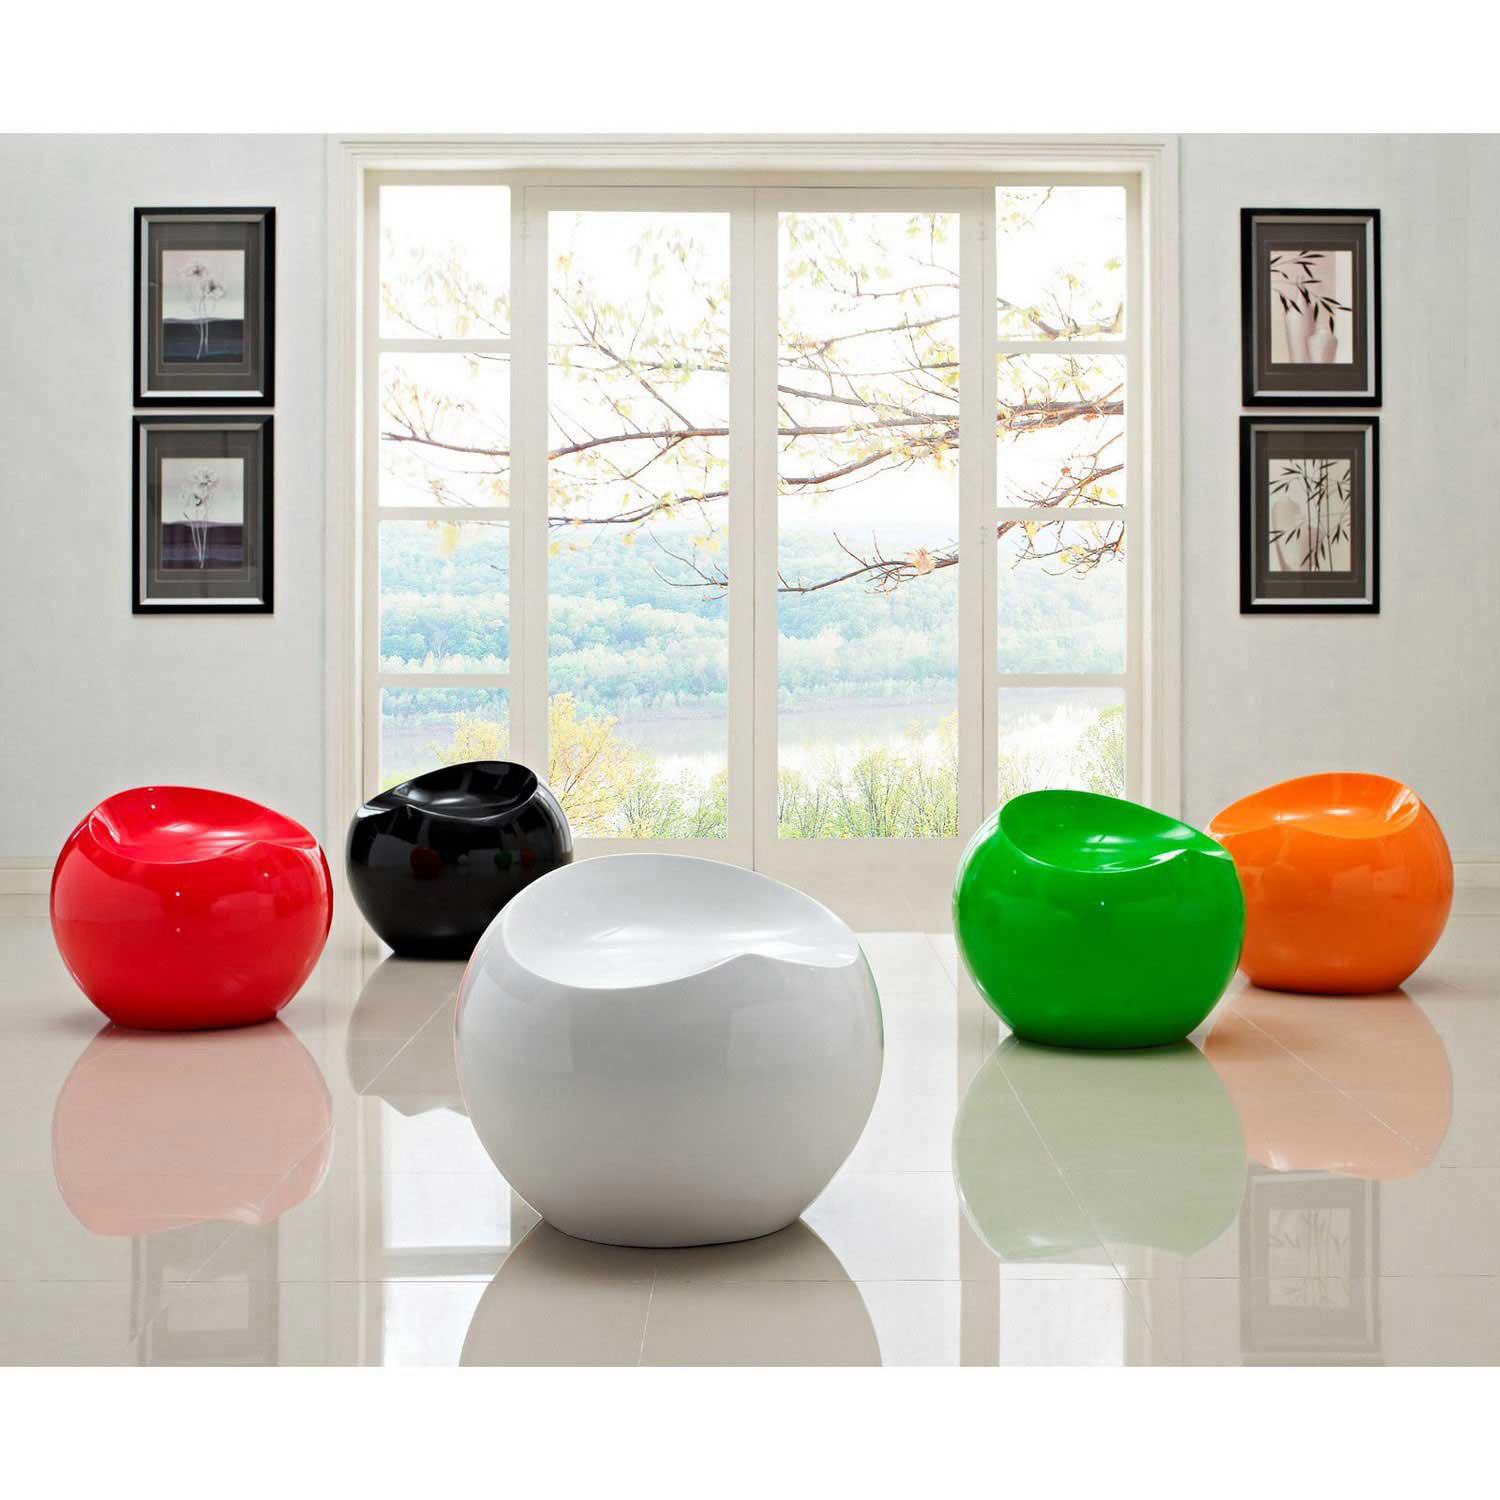 Modway Drop Multicolored Stools Set of 5 - Multicolored